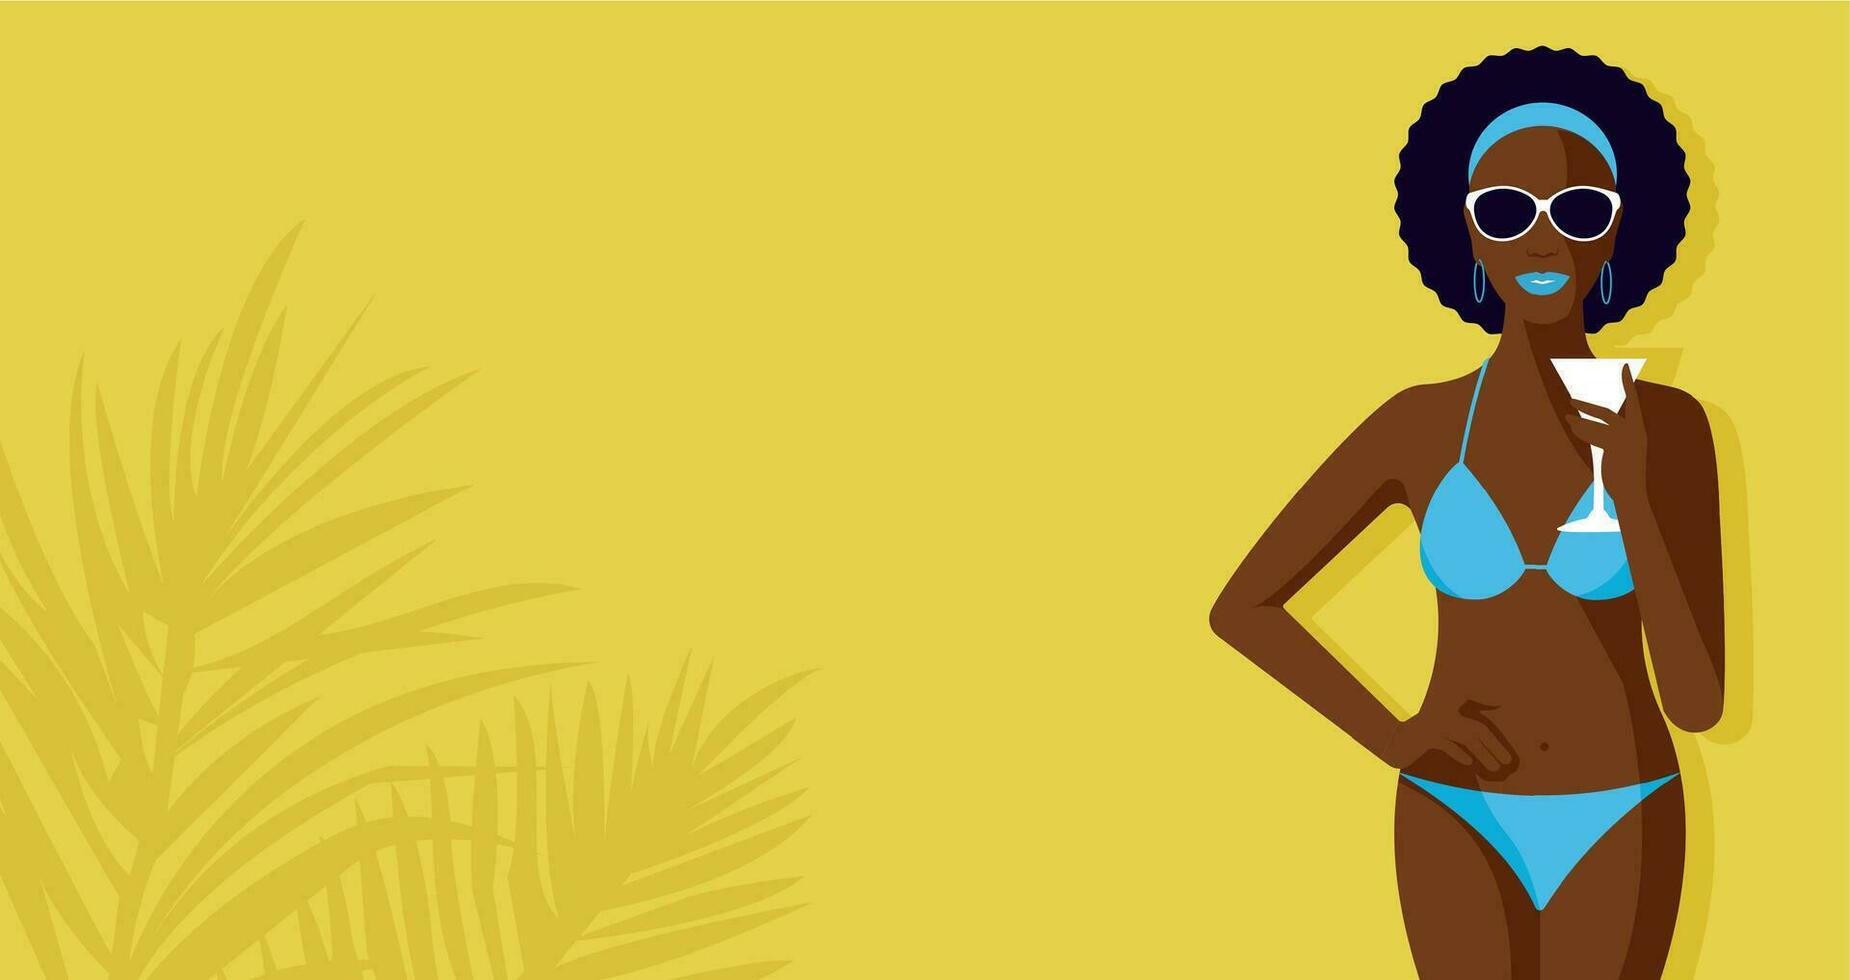 Black woman in blue bikini hold glass. Horizontal yellow background with tropical palm leave shade. vector